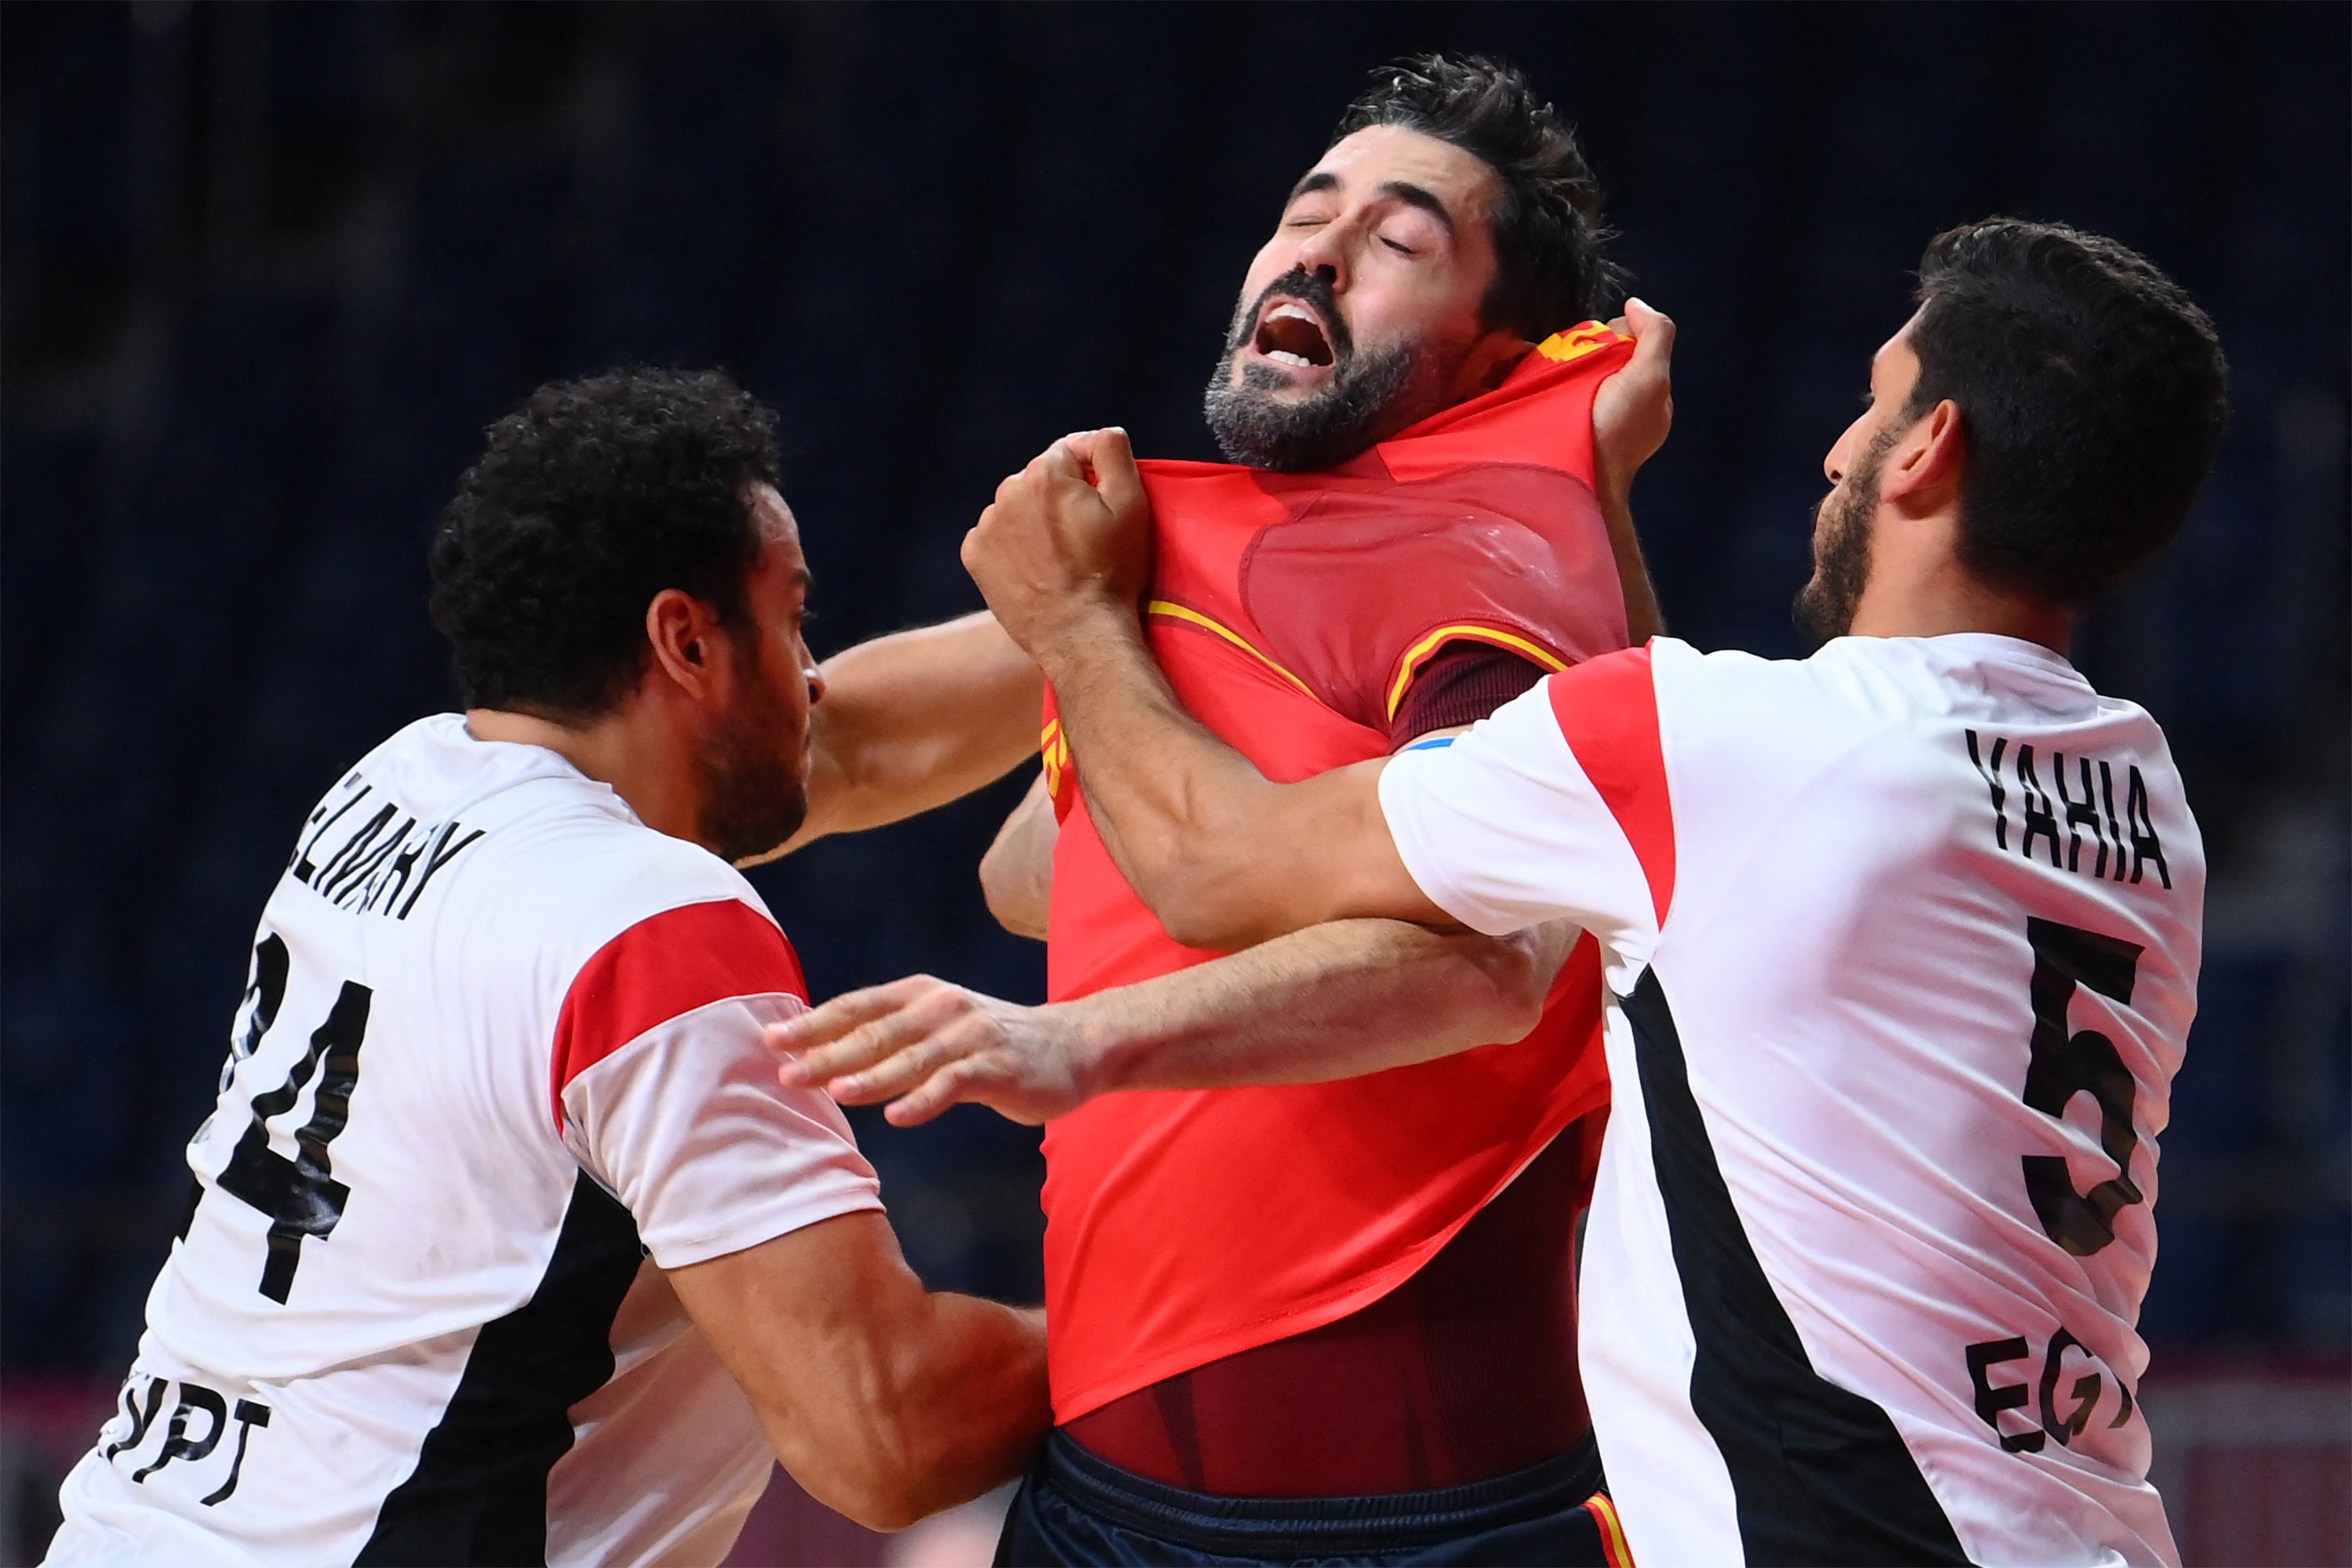 Spain's centre back Raul Entrerrios (C) is challenged by Egypt's pivot Ibrahim El Masry (L) during the men's bronze medal handball match between Egypt and Spain of the Tokyo 2020 Olympic Games at the Yoyogi National Stadium in Tokyo on August 7, 2021. (Photo by Franck FIFE / AFP)